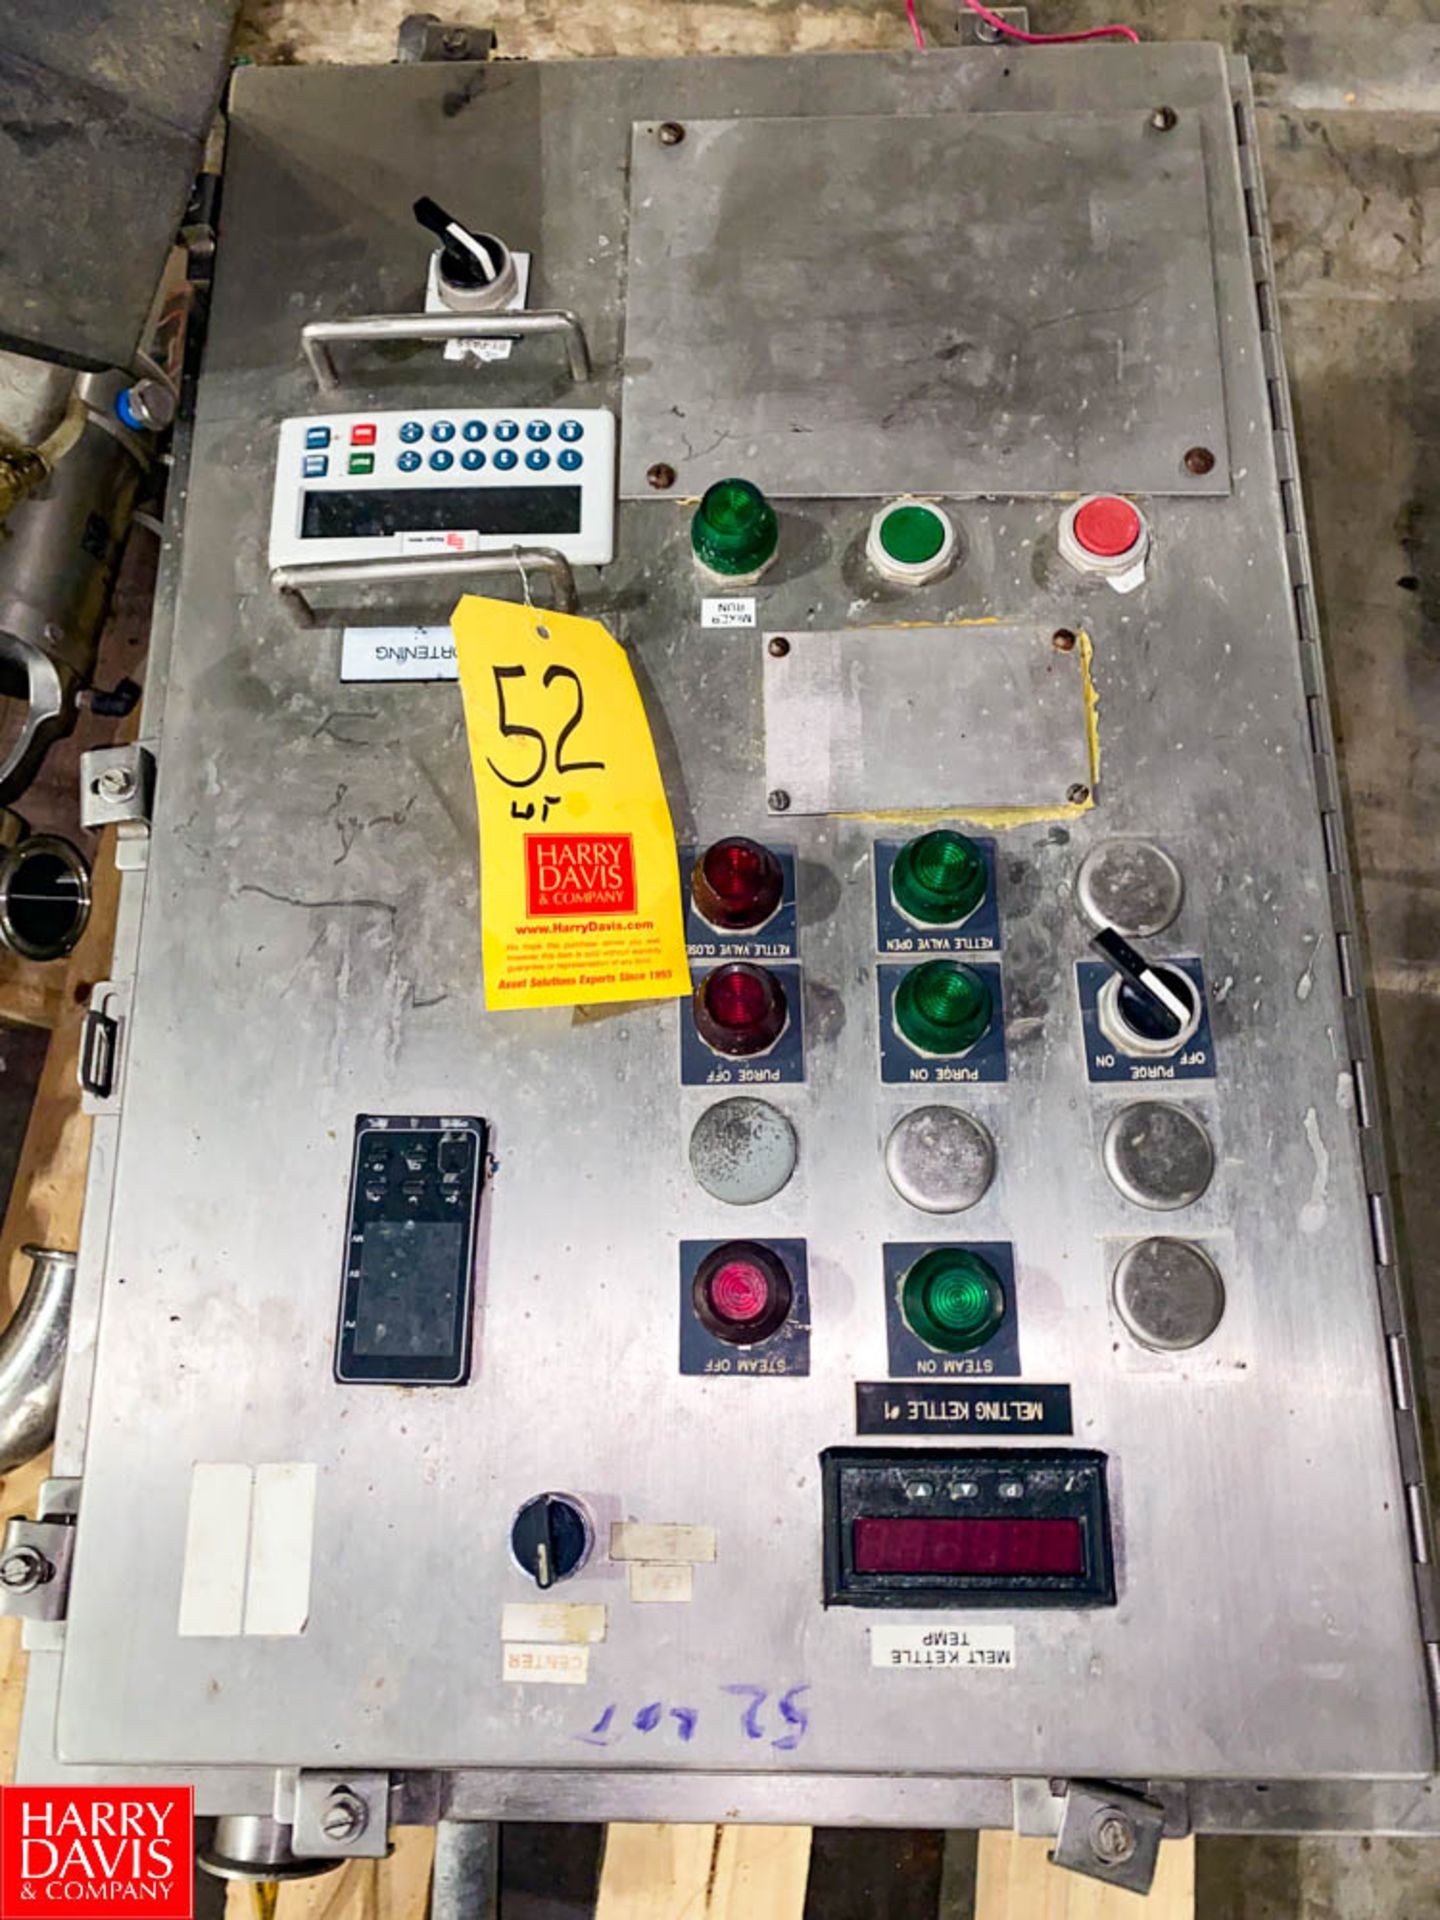 (4) Control Panels, with Readouts and Switches - Rigging Fee: $950